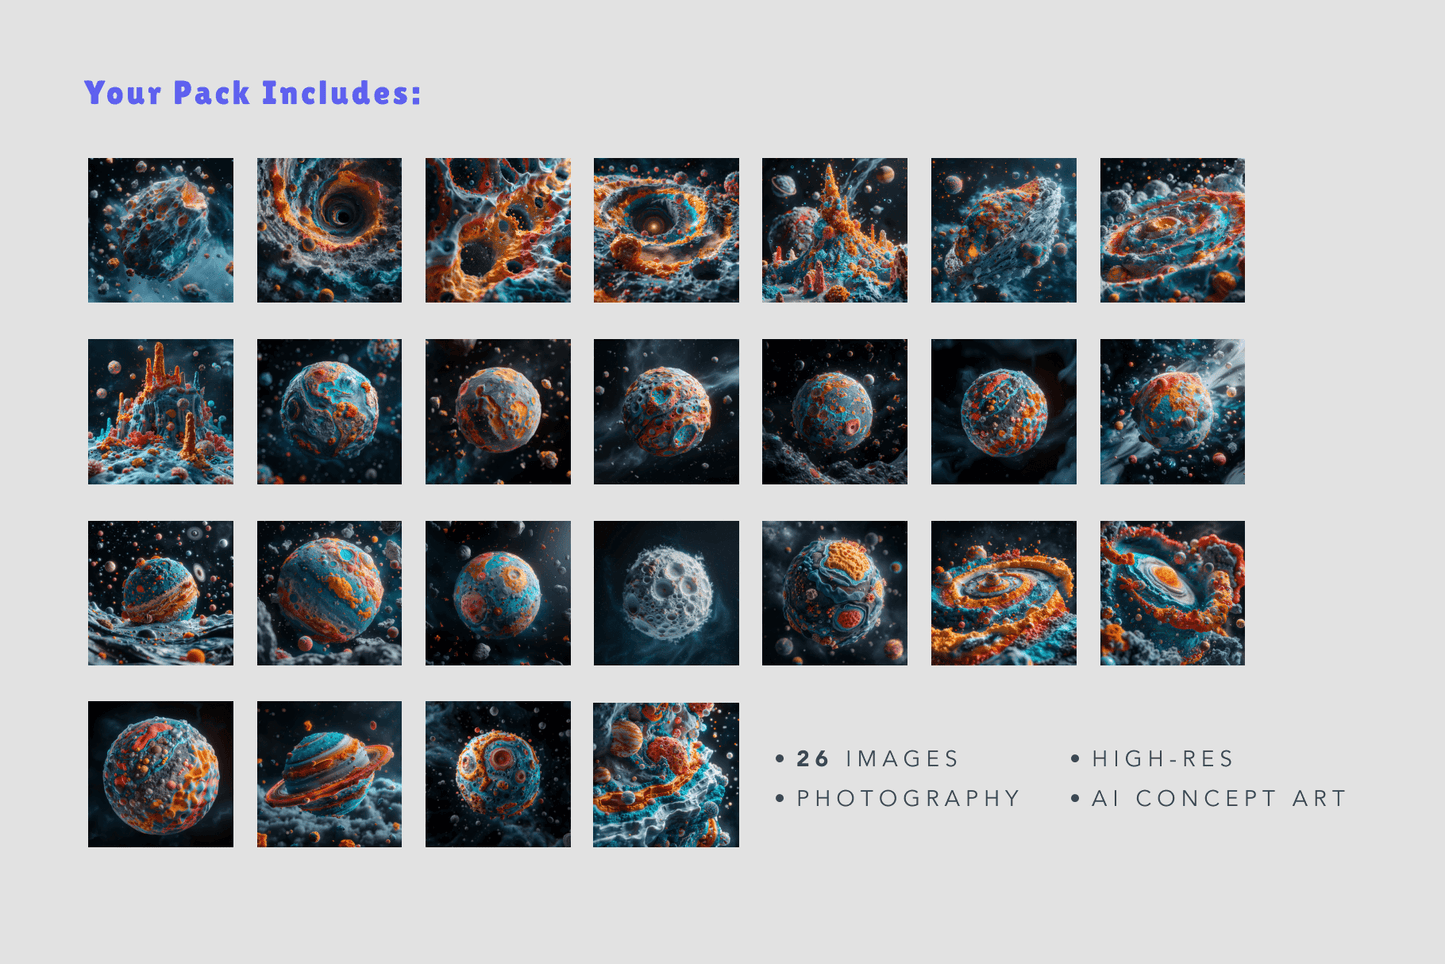 A series of planet images with colourful textures